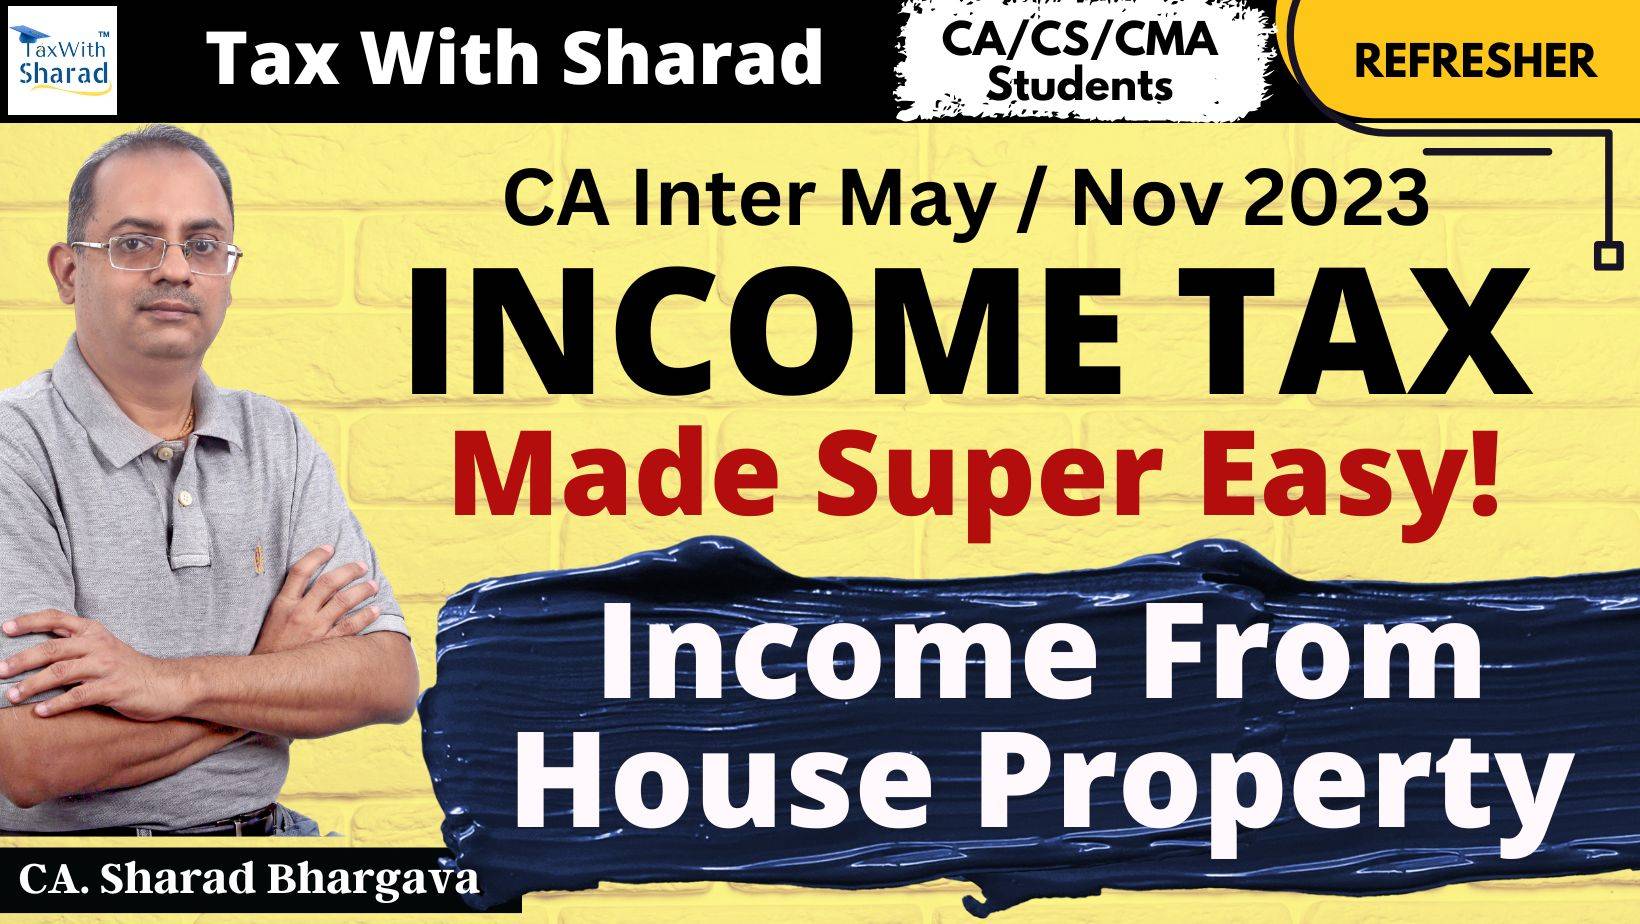 Refresher (DT) / Income from House Property / CA Inter May/Nov 2023 / CA. Sharad Bhargava